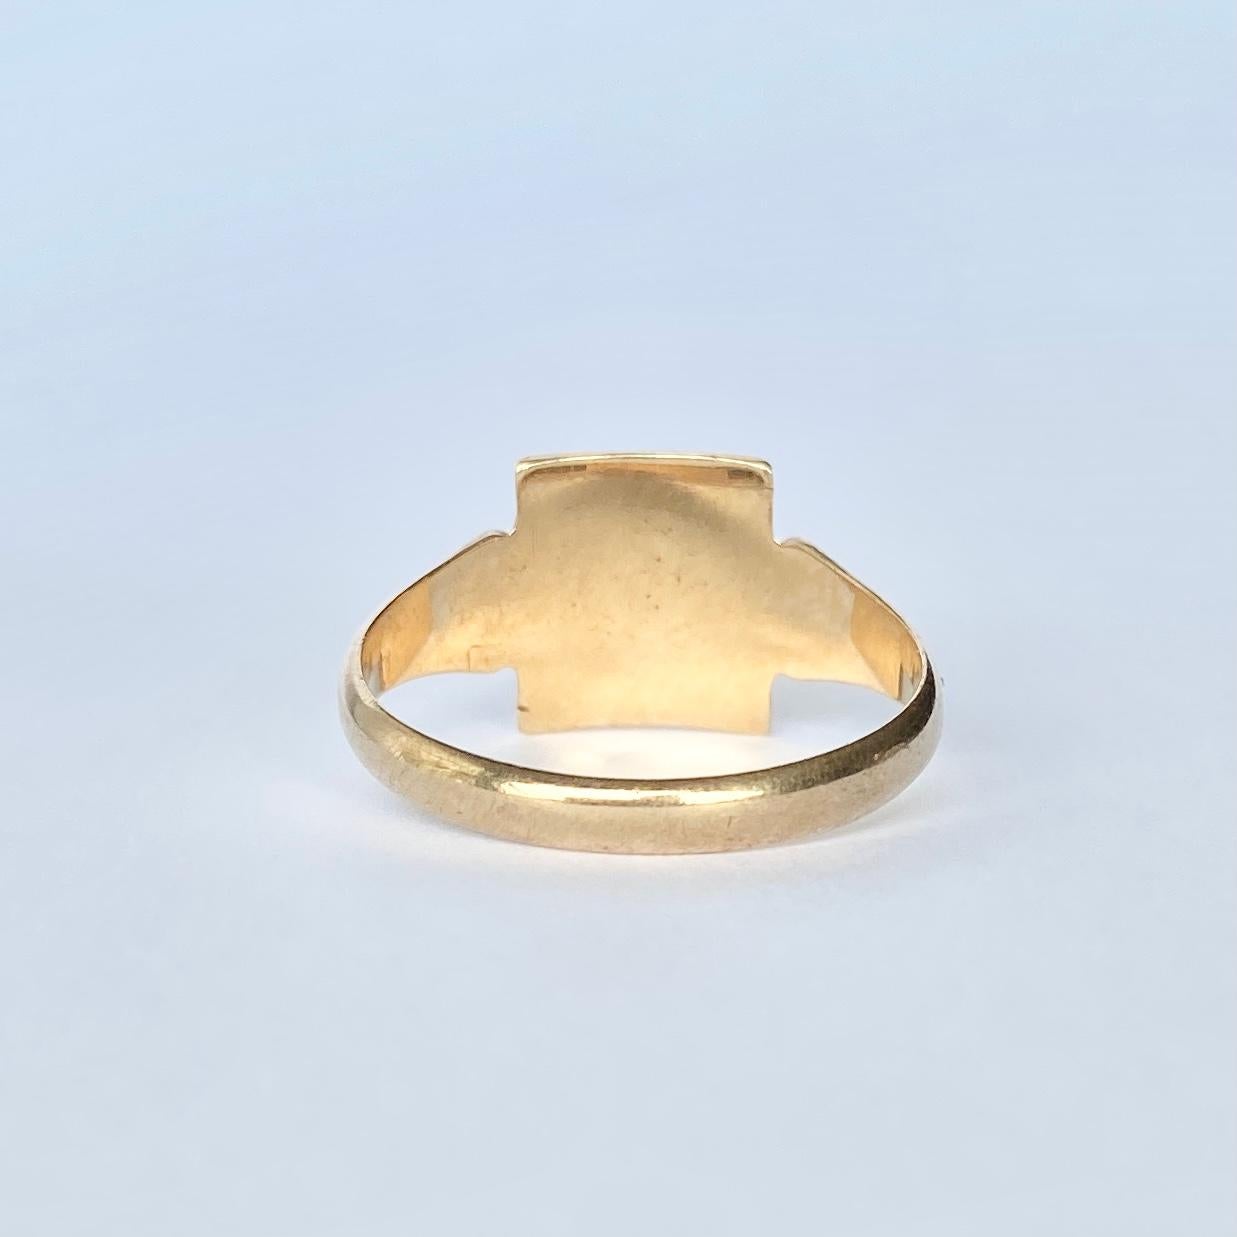 This sweet signet is modelled in 9ct gold and has intricate engraving around the edges. Fully hallmarked Birmingham 1968.

Ring Size: R 1/2 or 8 3/4 
Face Dimensions: 11x9mm 

Weight: 2.9g